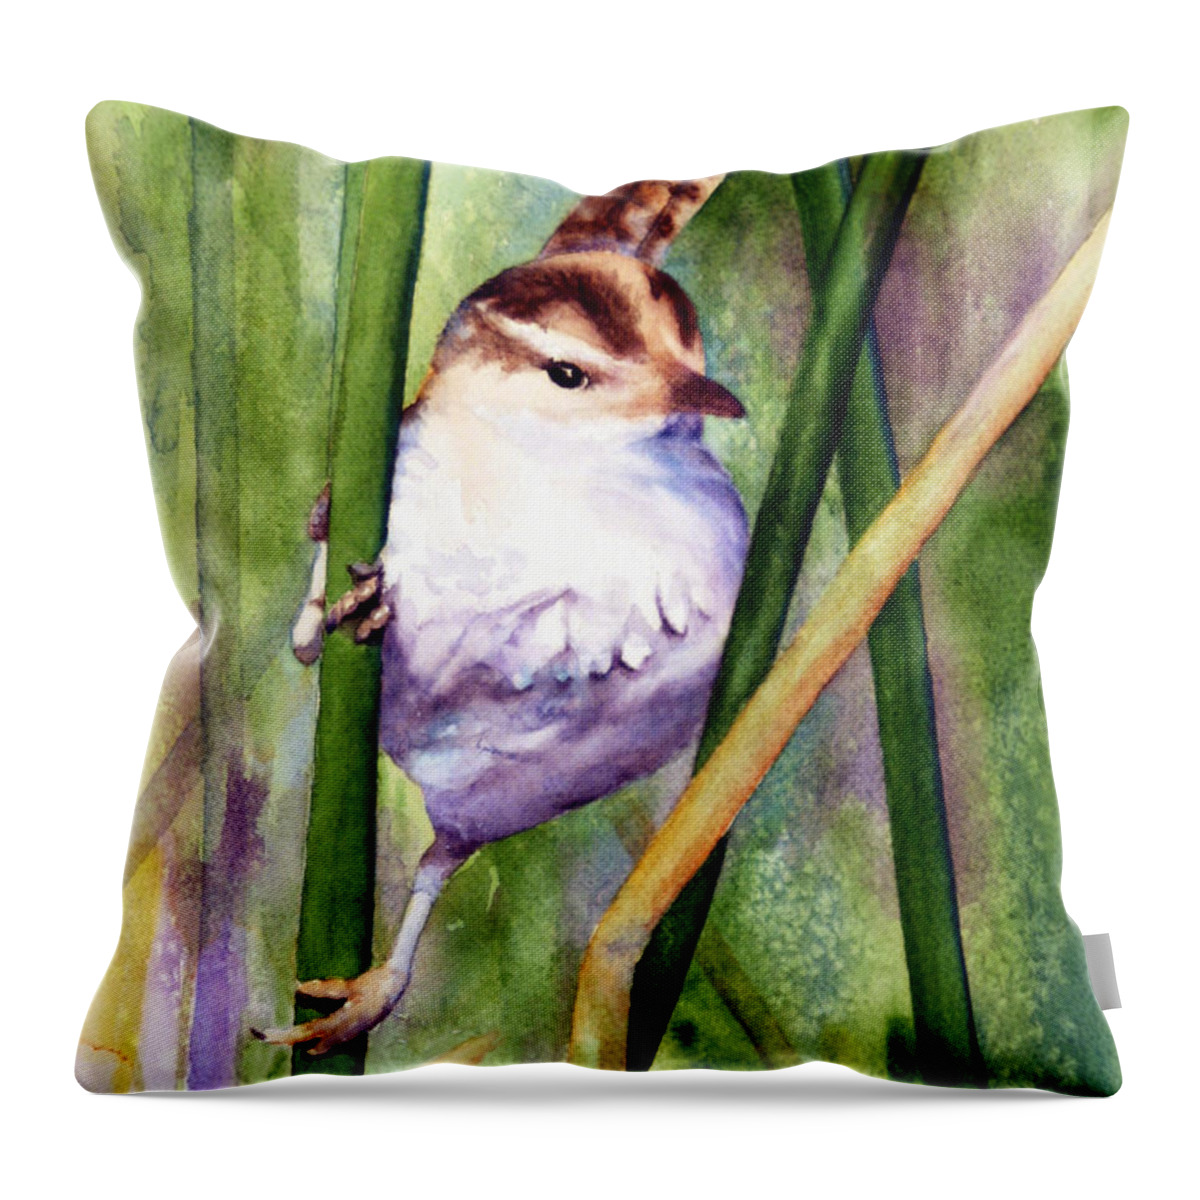 Bird Throw Pillow featuring the painting Silver Creek Marsh Wren by Marsha Karle